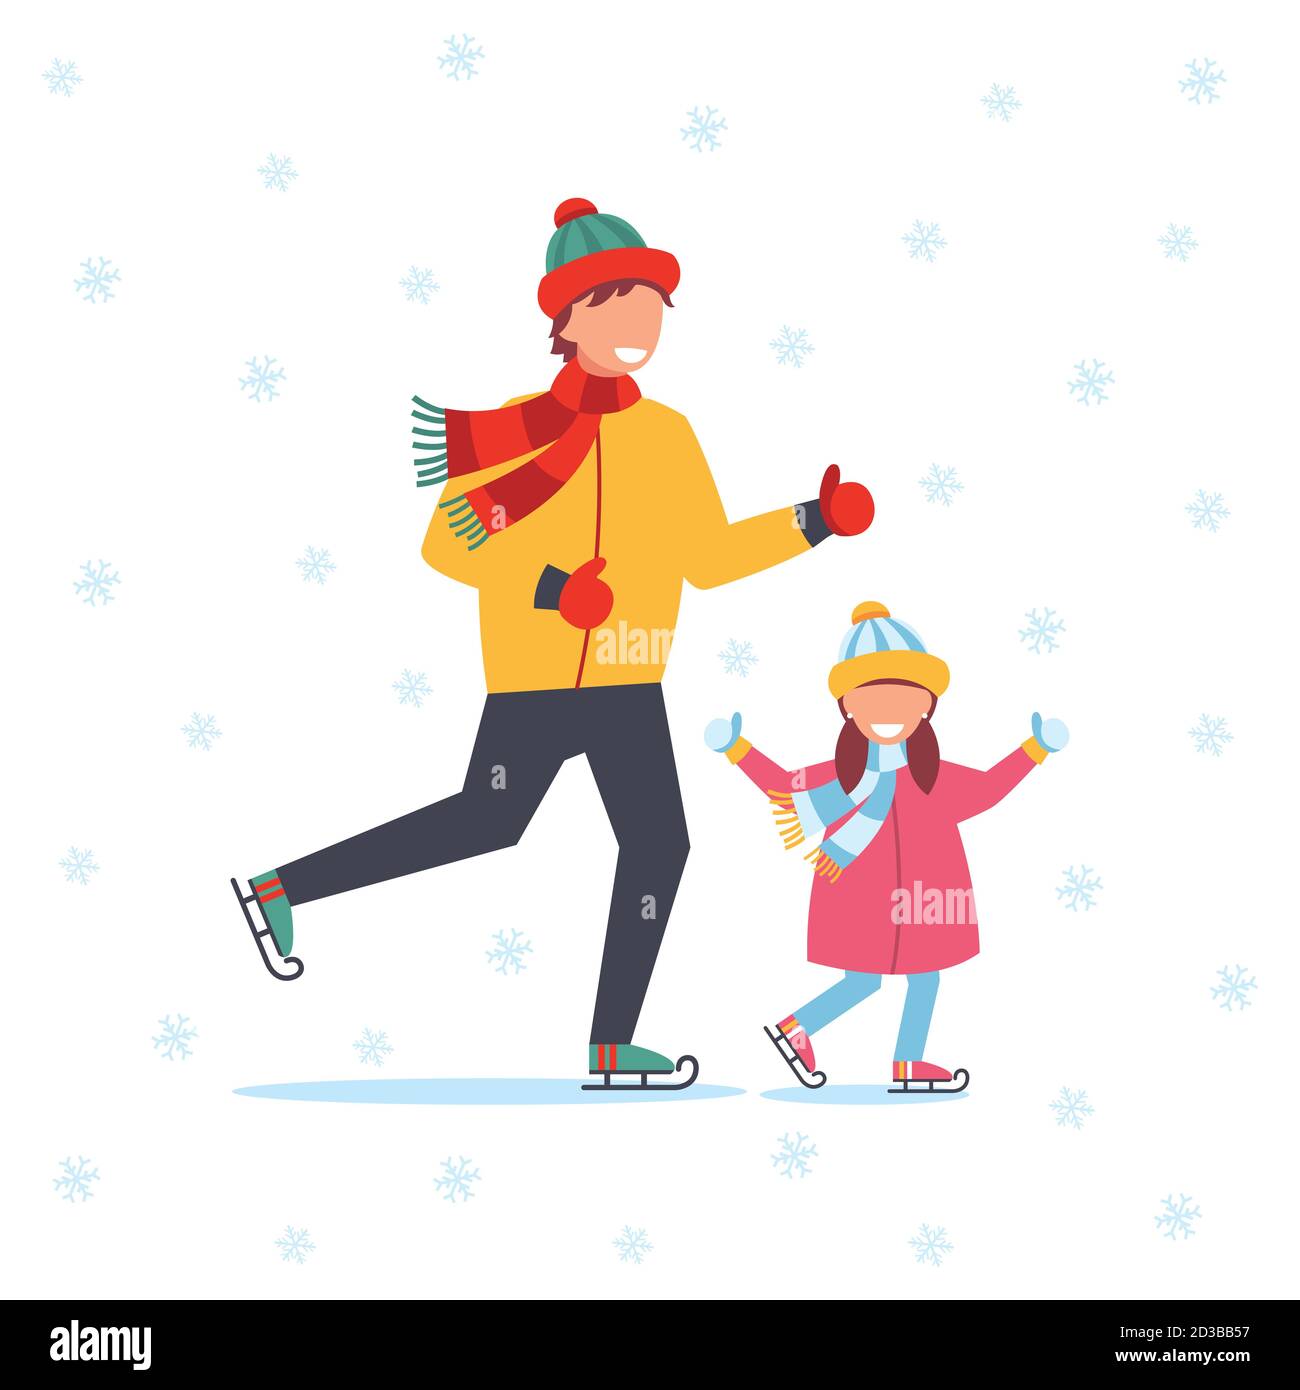 Illustration with children skating with snowy scenery. Vector illustration in simple style on white isolated background Stock Vector